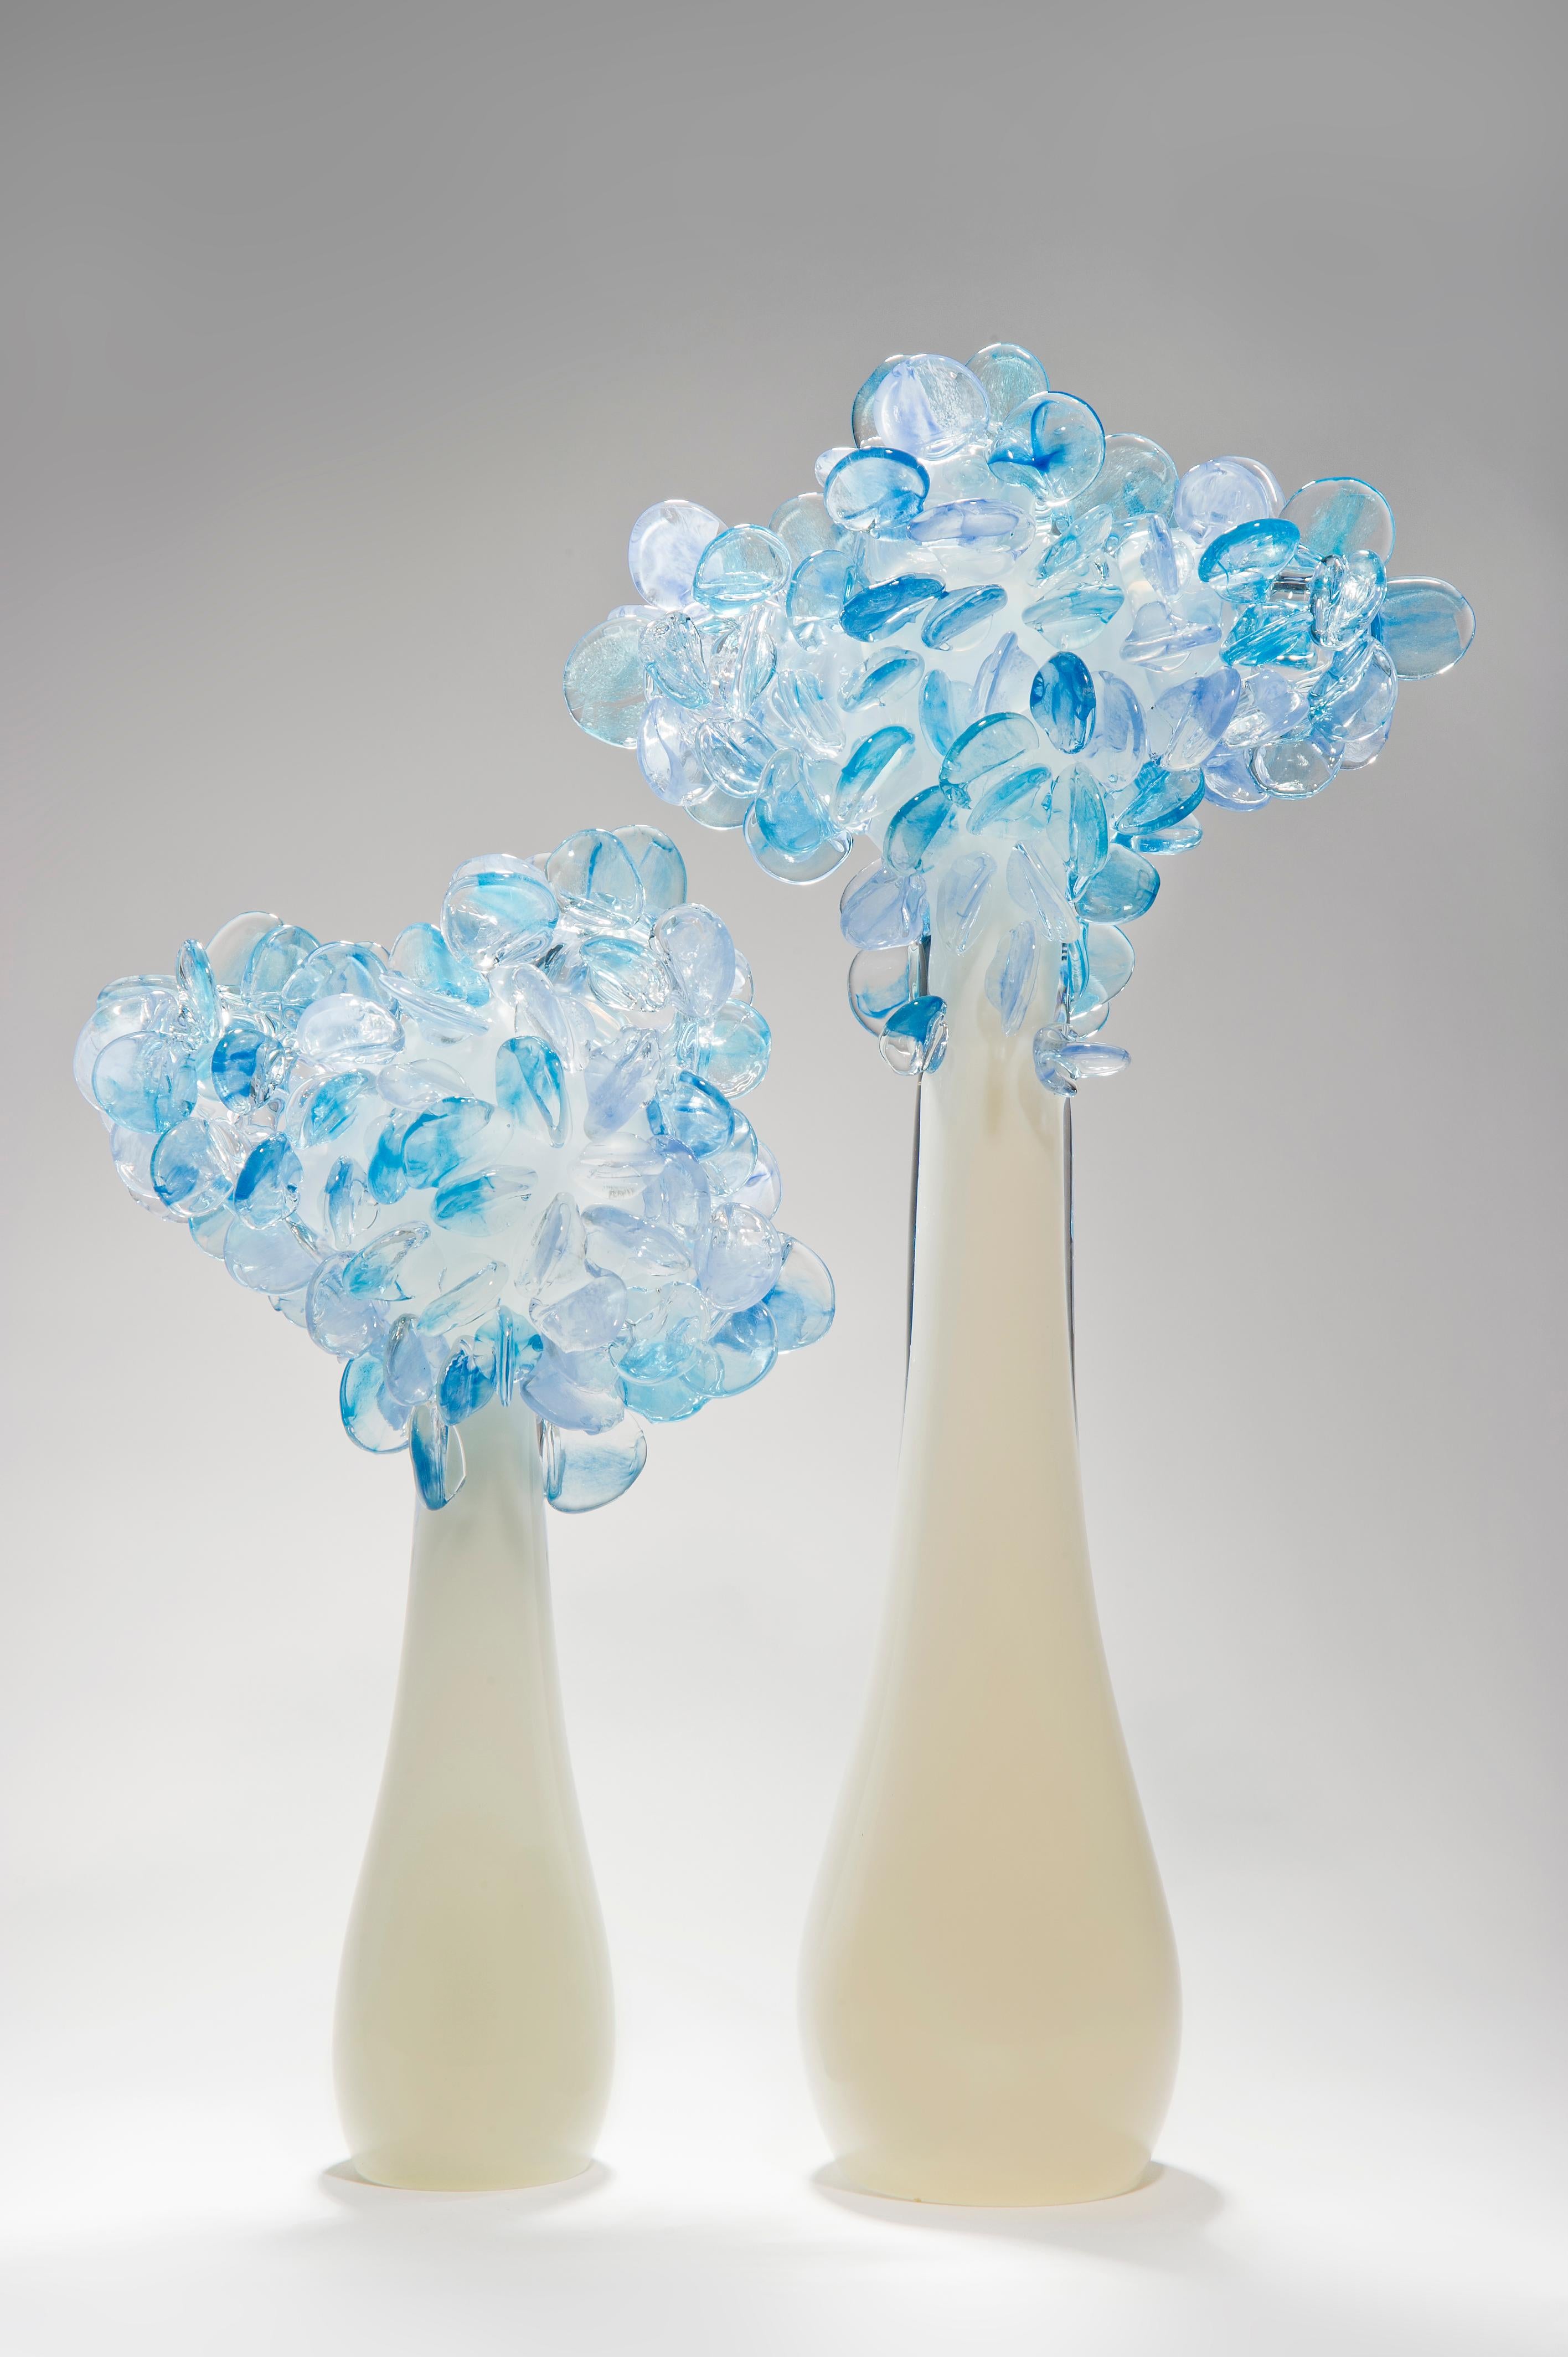 Contemporary Enchanted Dawn in Blue, a Unique Glass Tree Sculpture by Louis Thompson